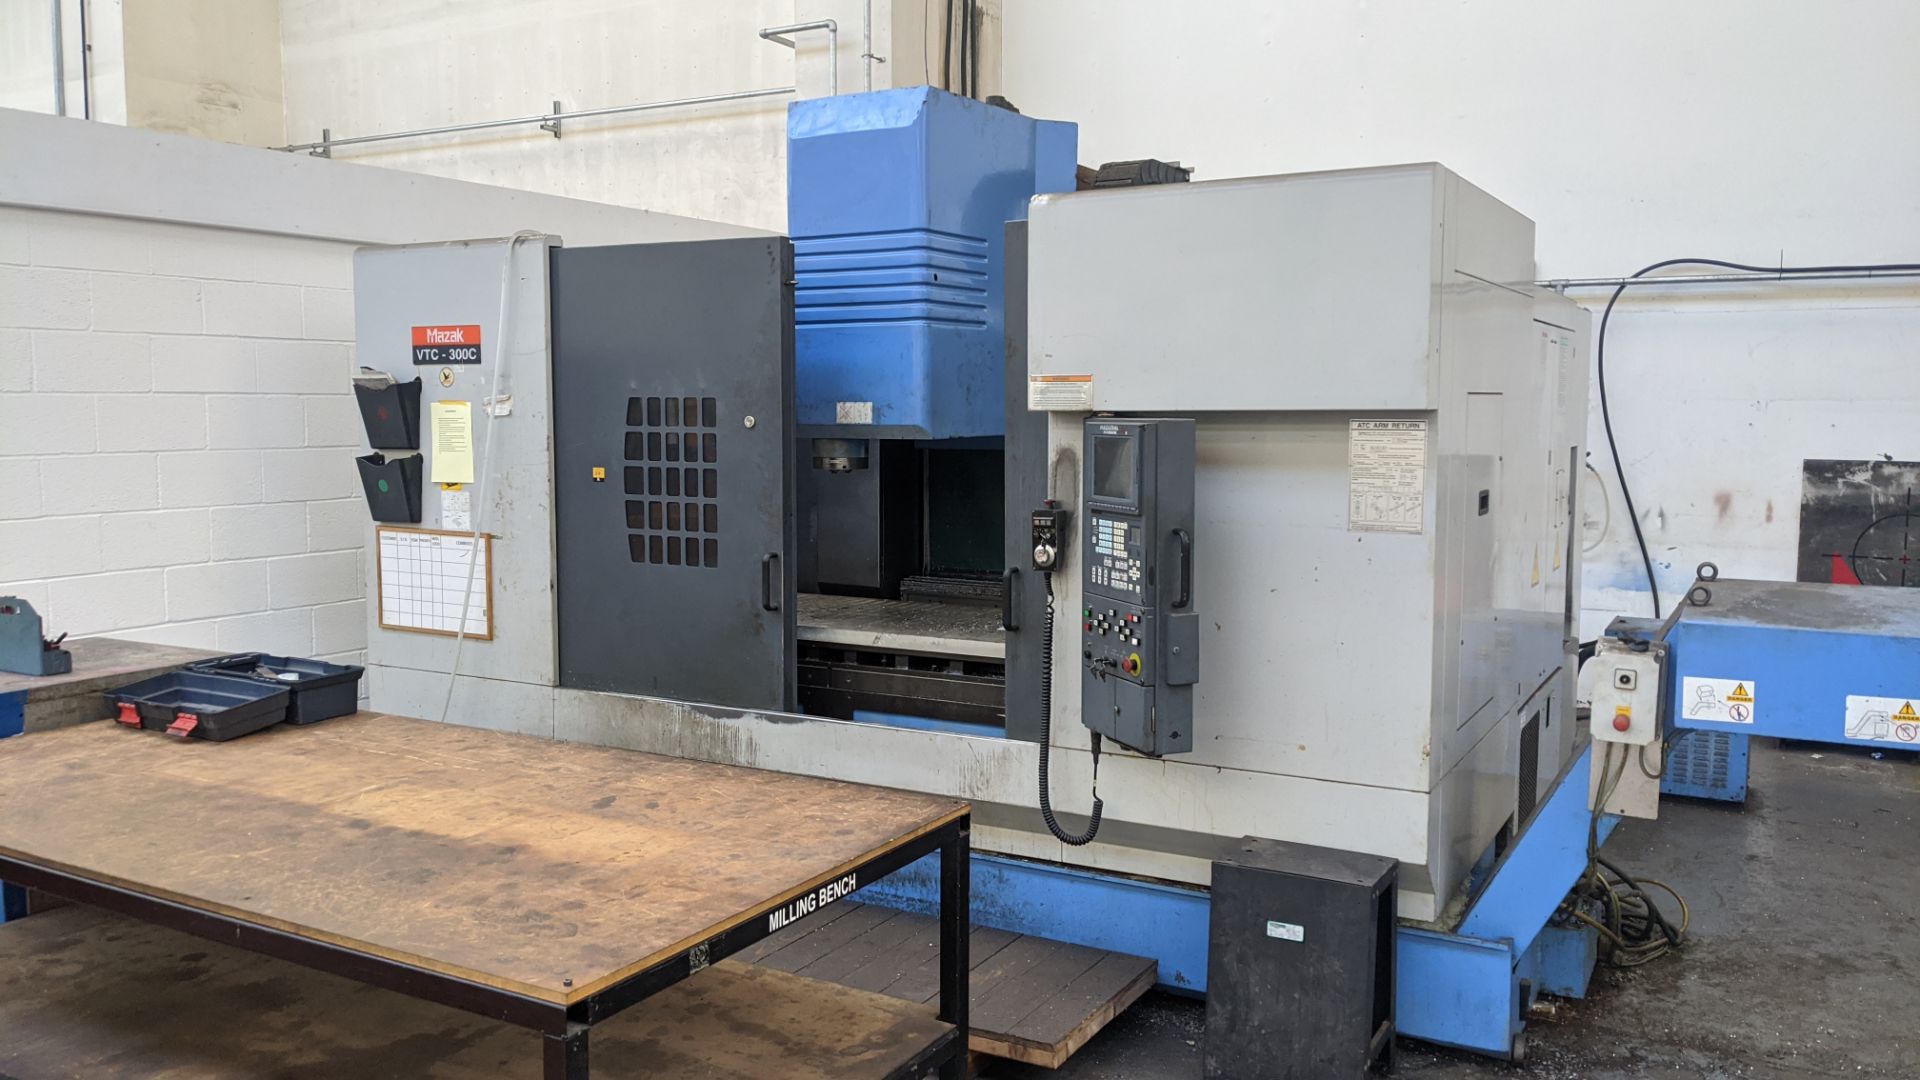 2001 Mazak VTC-300C machining centre with Mazatrol 640M controller. This lot recently had the - Image 4 of 28